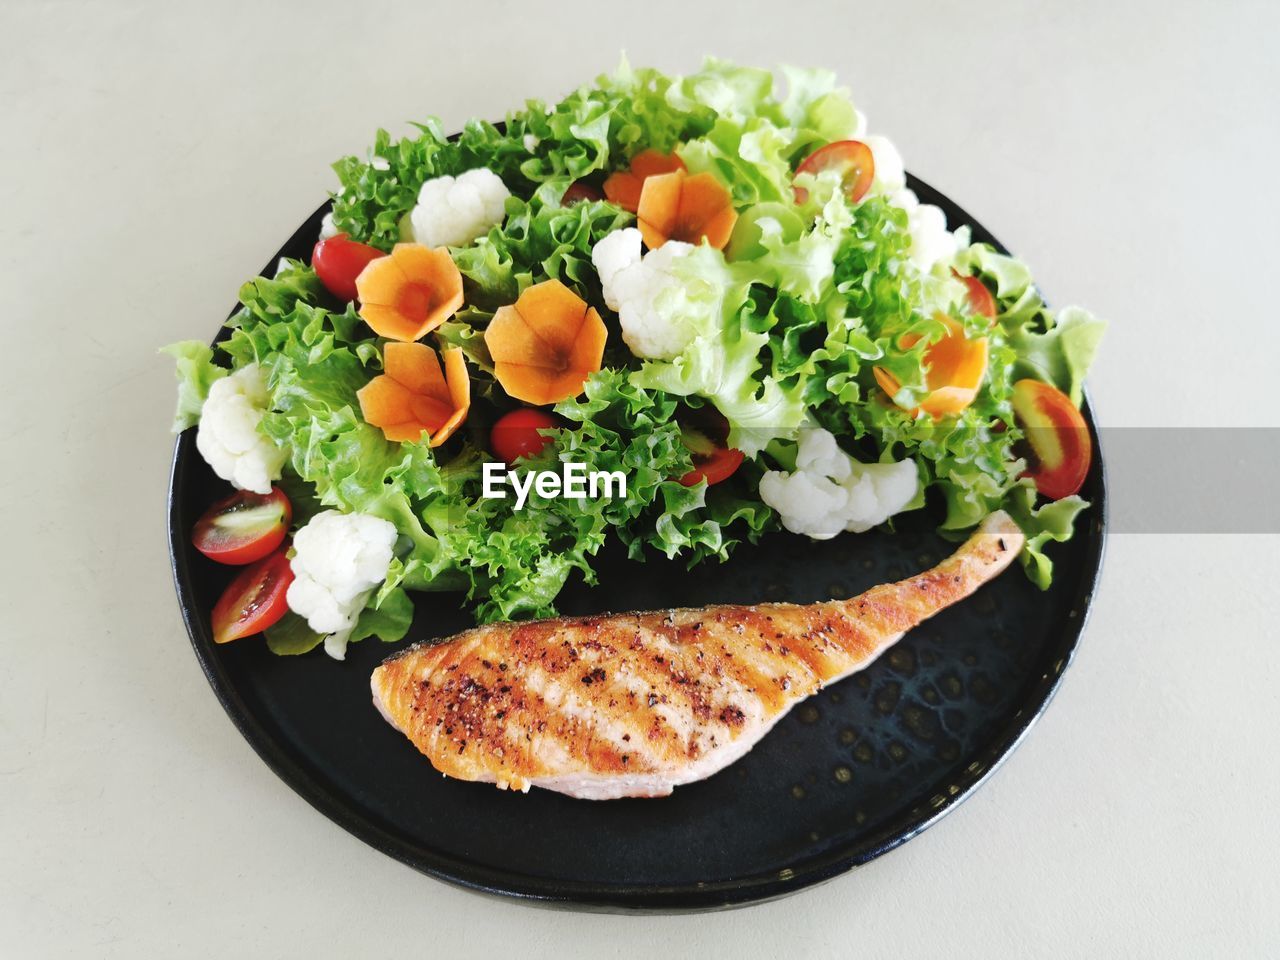 HIGH ANGLE VIEW OF SALAD IN PLATE